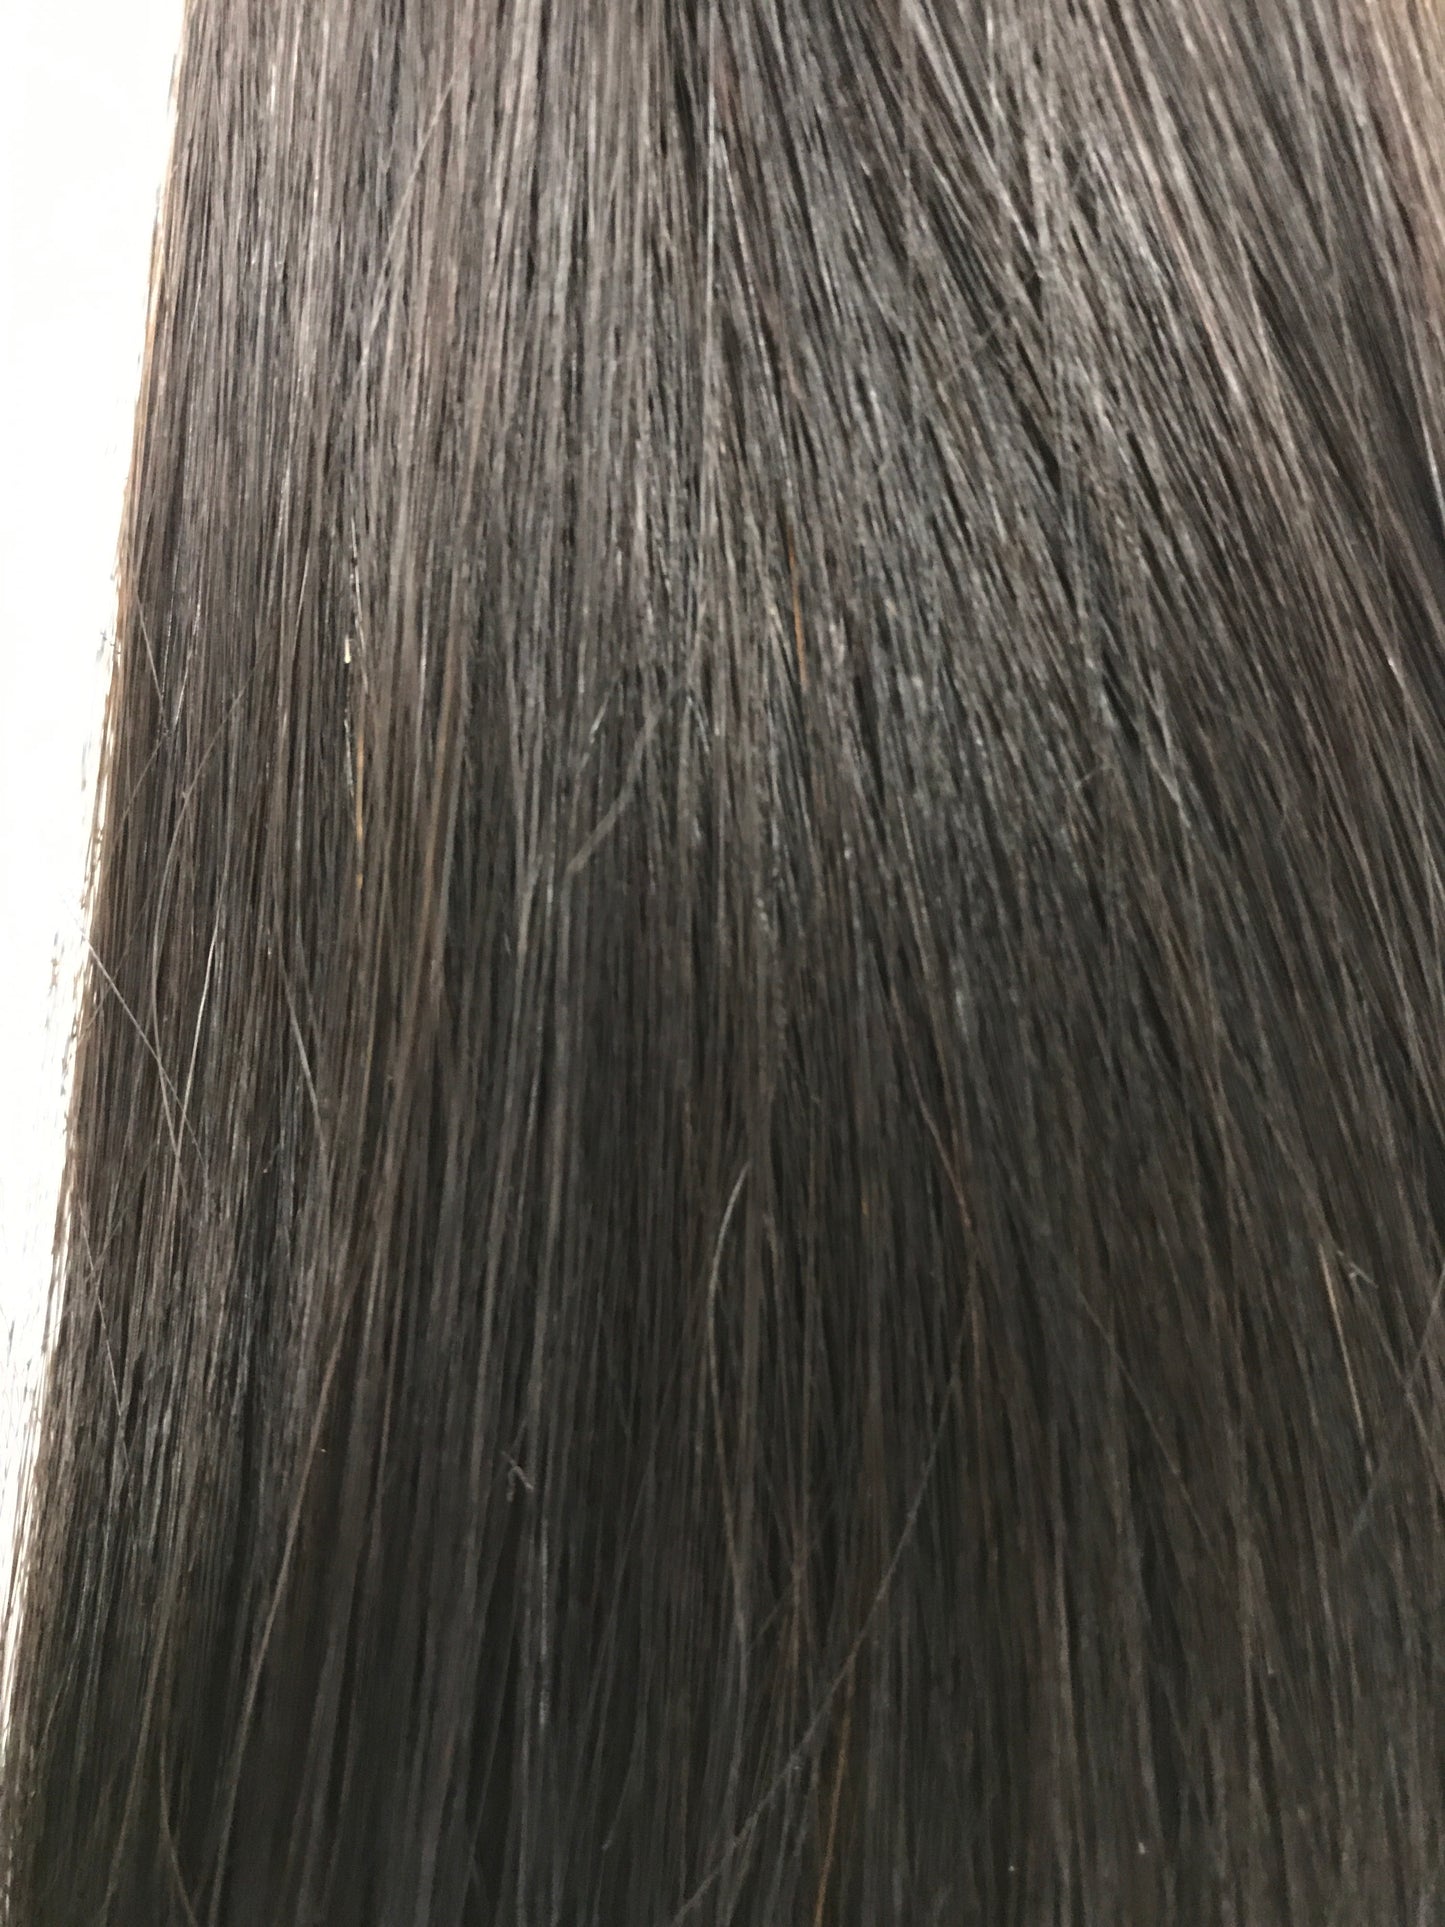 Brazilian Virgin Remy Human Hair, Tape Extensions, Straight, 22'', Virgin Uncoloured. Quick Shipping!